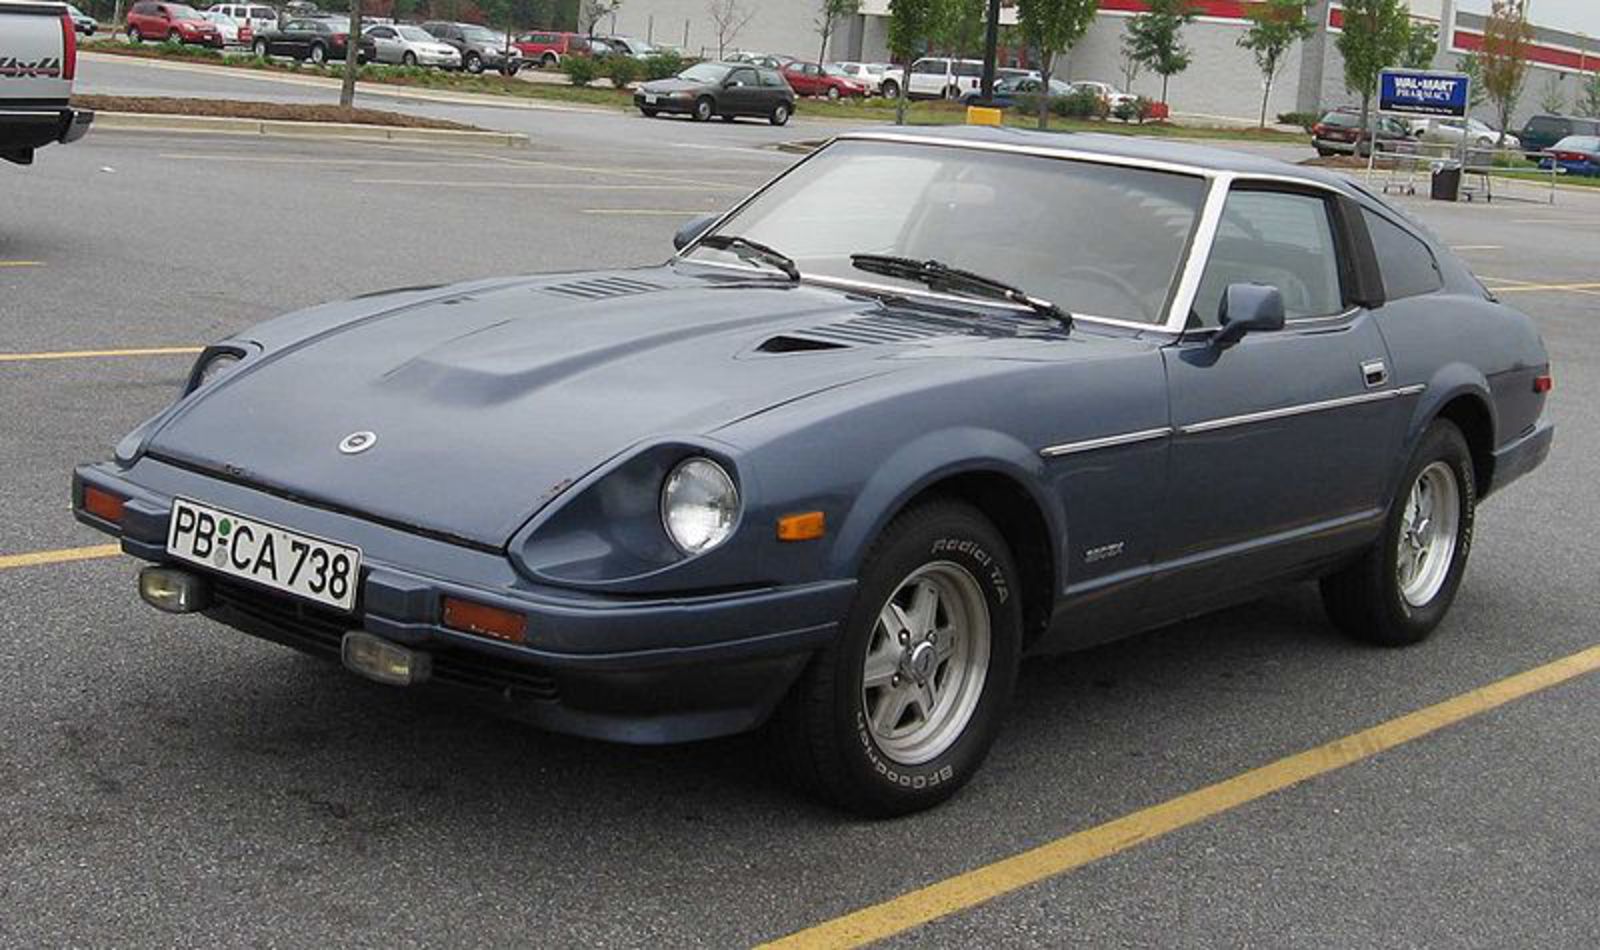 The Nissan 280ZX was produced by the Nissan Motor Company from 1978 to 1983.